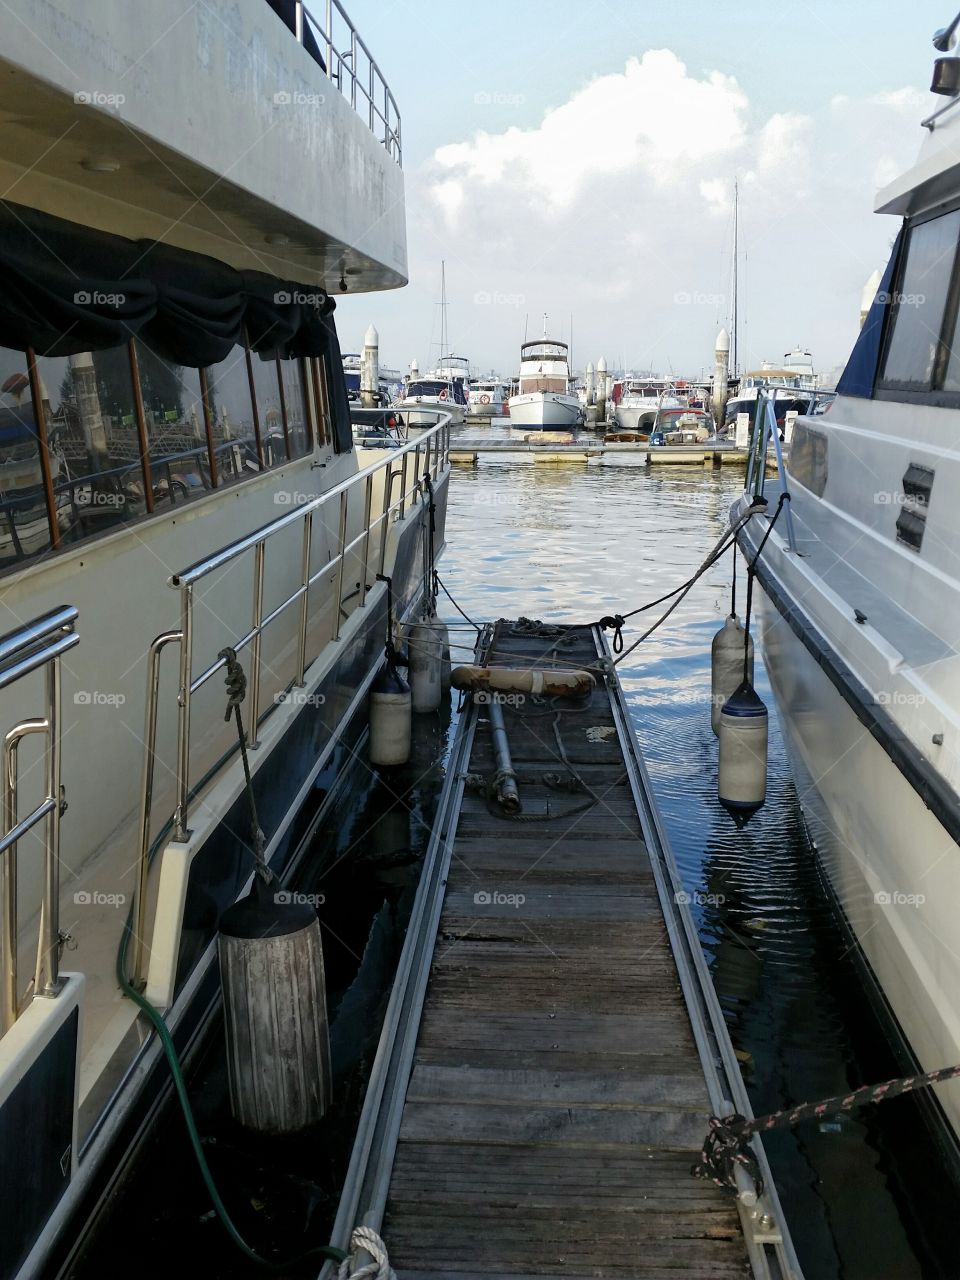 Side by side . Two boats anchored side by side with a shared boarding platform between them.